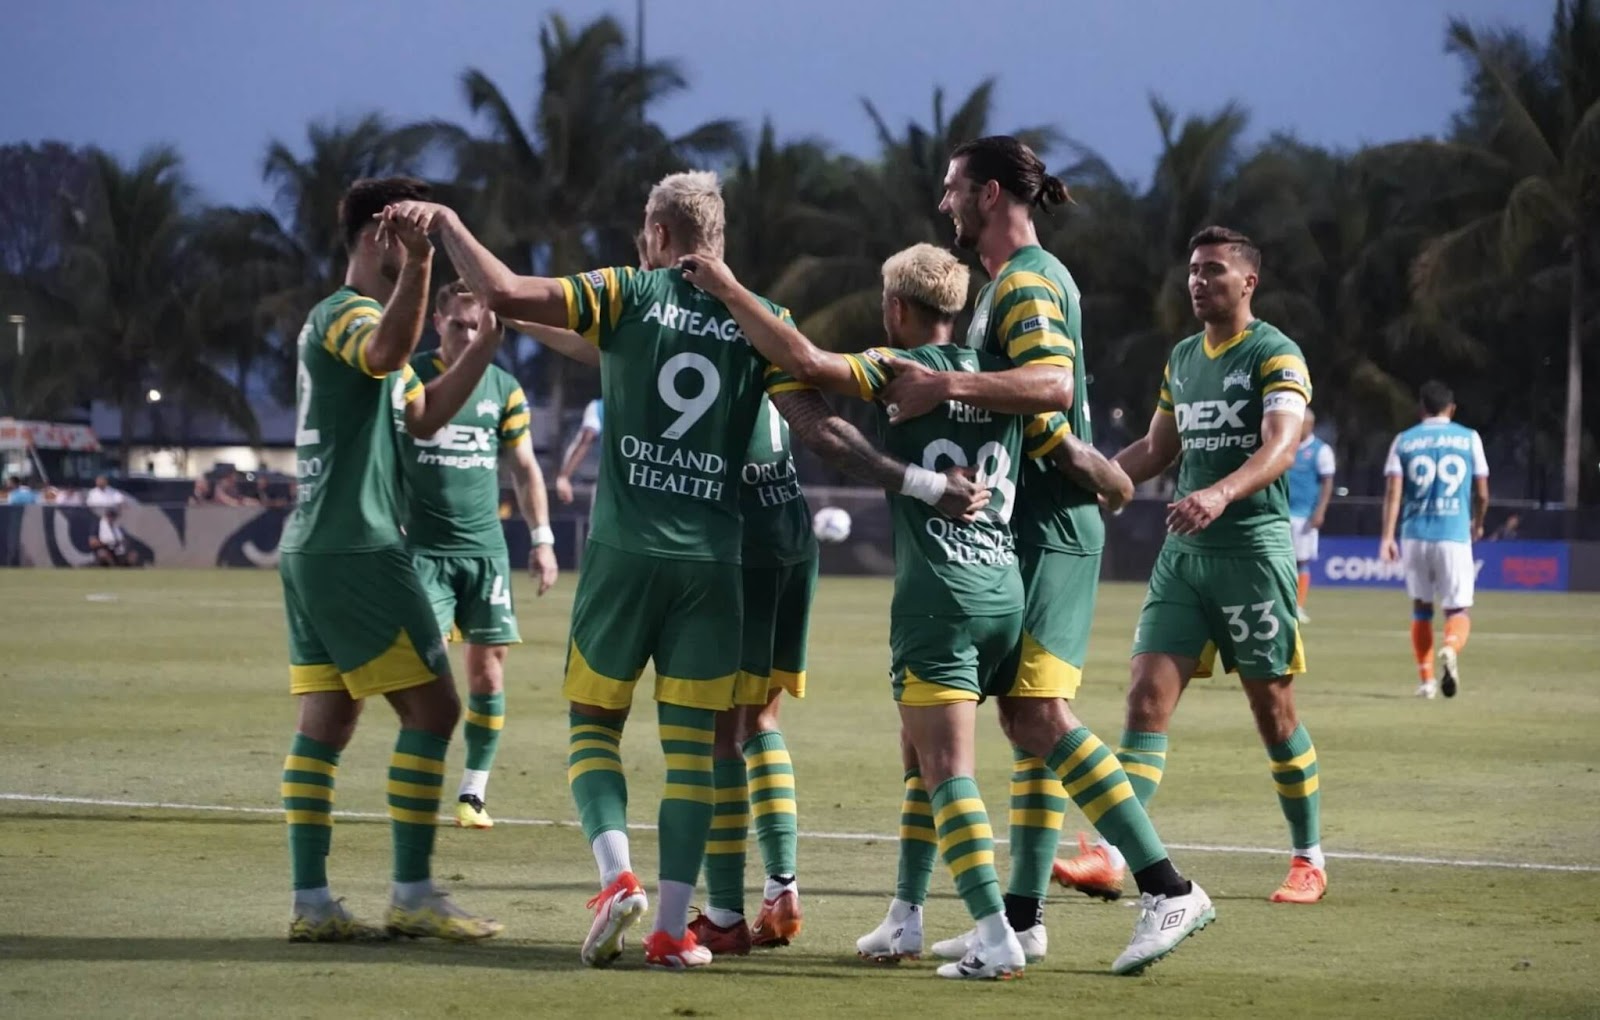 Tampa Bay Rowdies professional soccer team on the field after a game